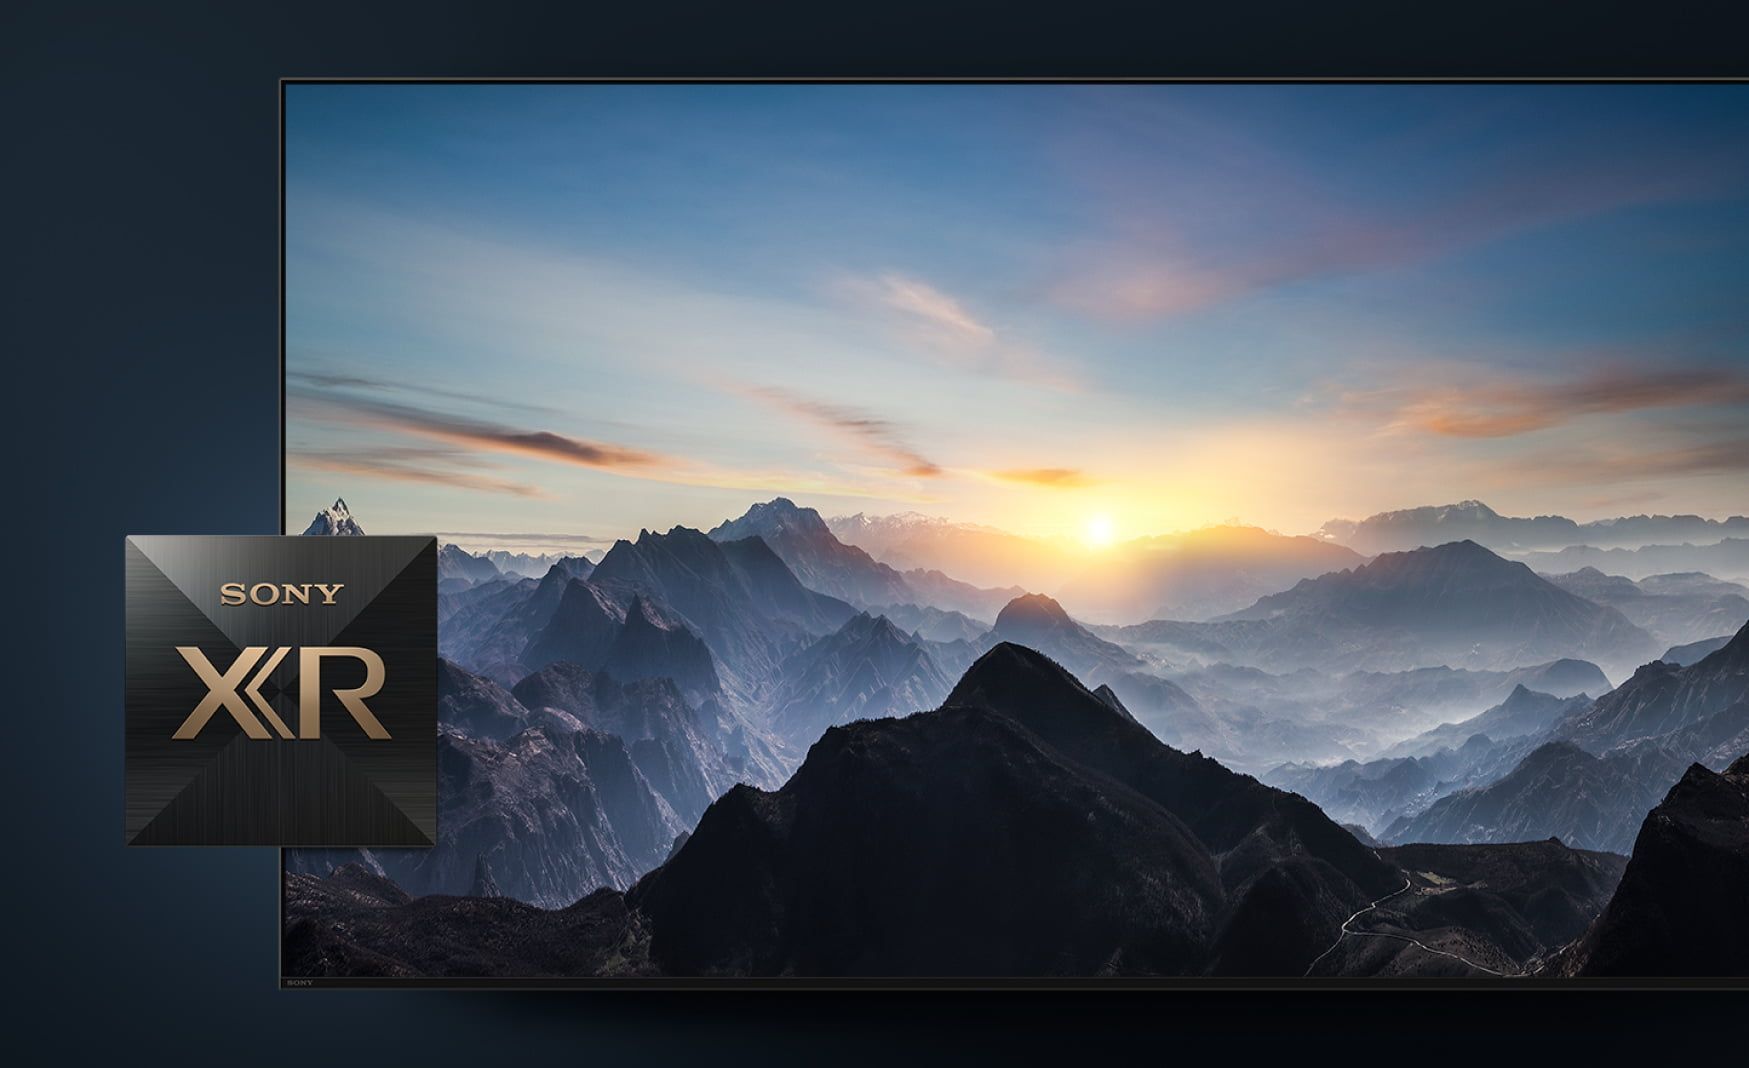 a sony branded television with a picture of mountains showing the sony XR processor